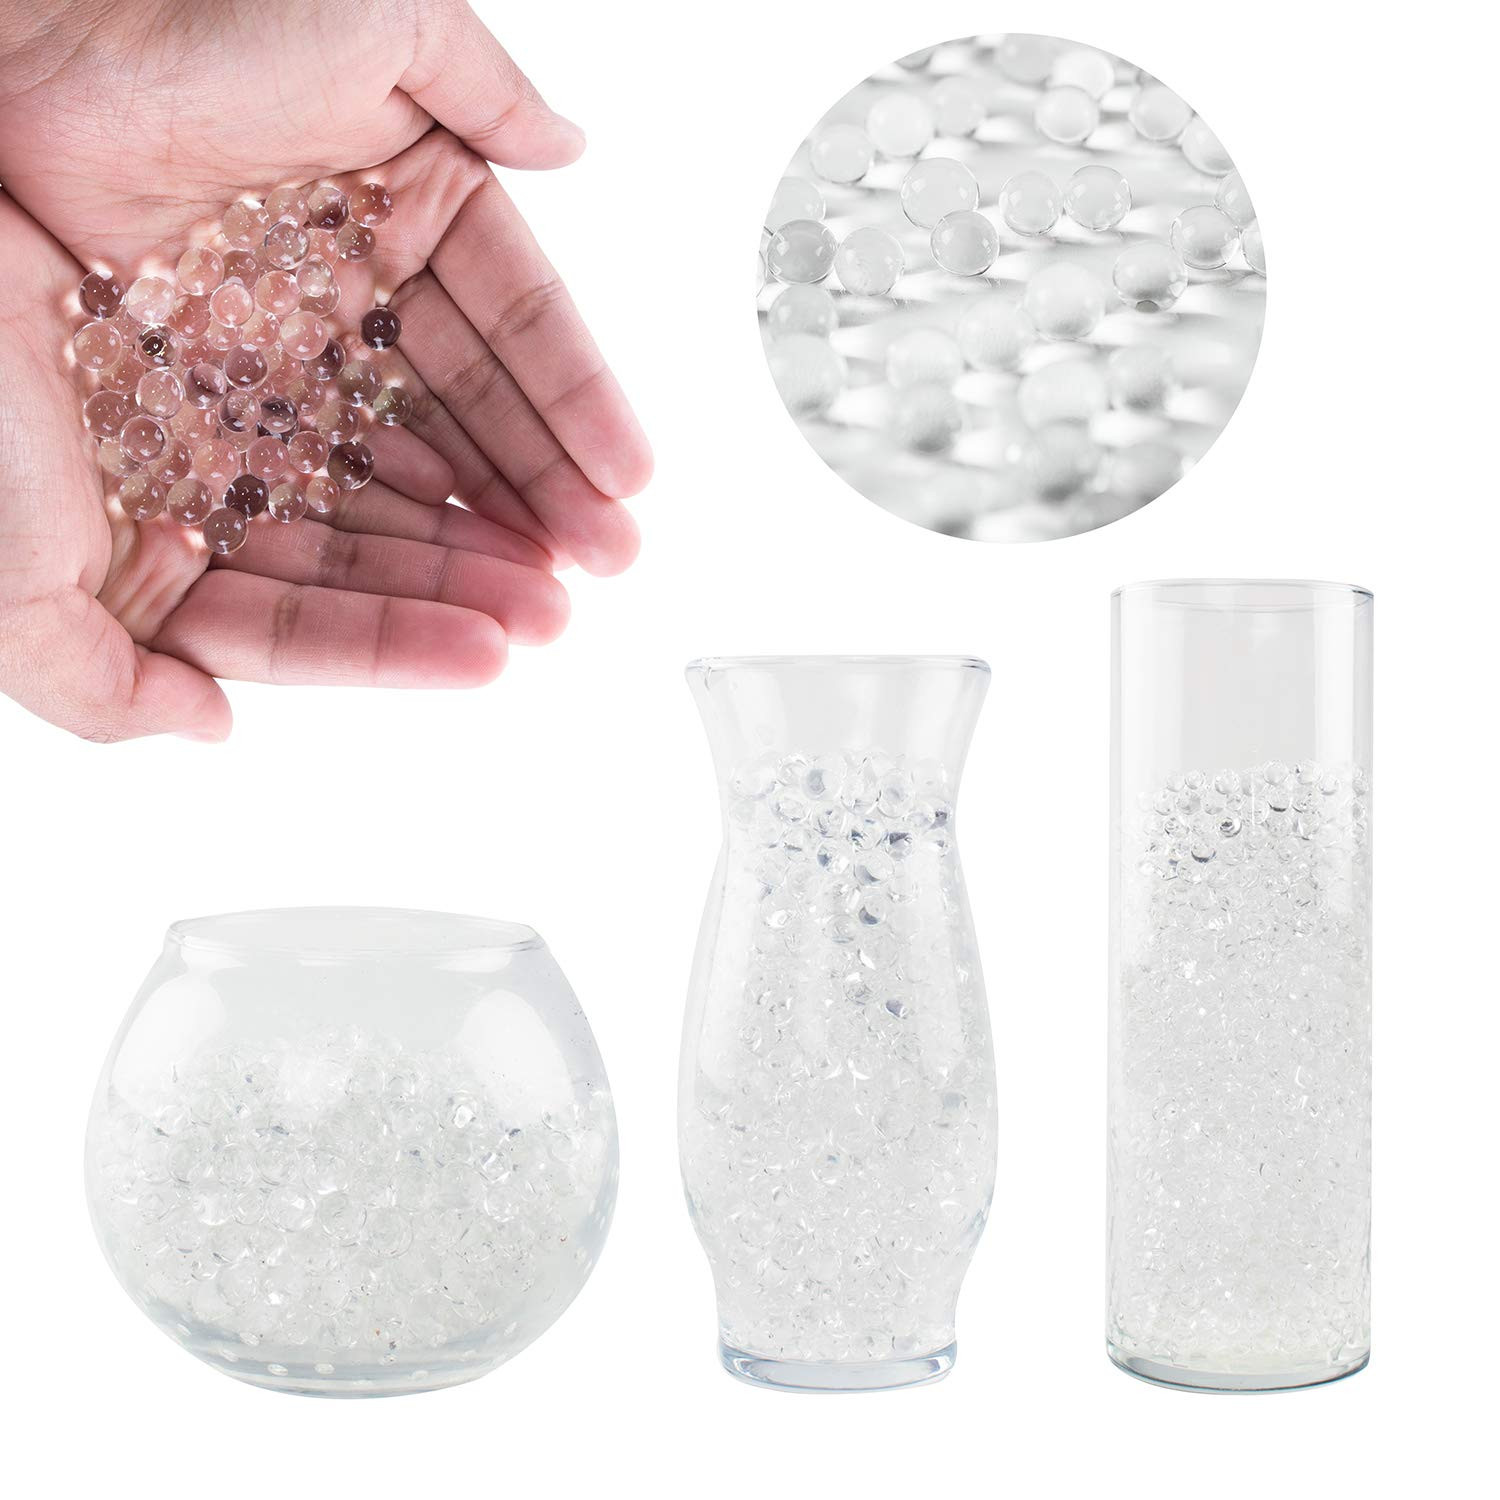 25 Fantastic Decorative Glass Pebbles for Vases 2024 free download decorative glass pebbles for vases of best floating pearls for centerpieces amazon com pertaining to super z outlet 1 pound bag of clear water gel beads pearls for vase filler candles weddin